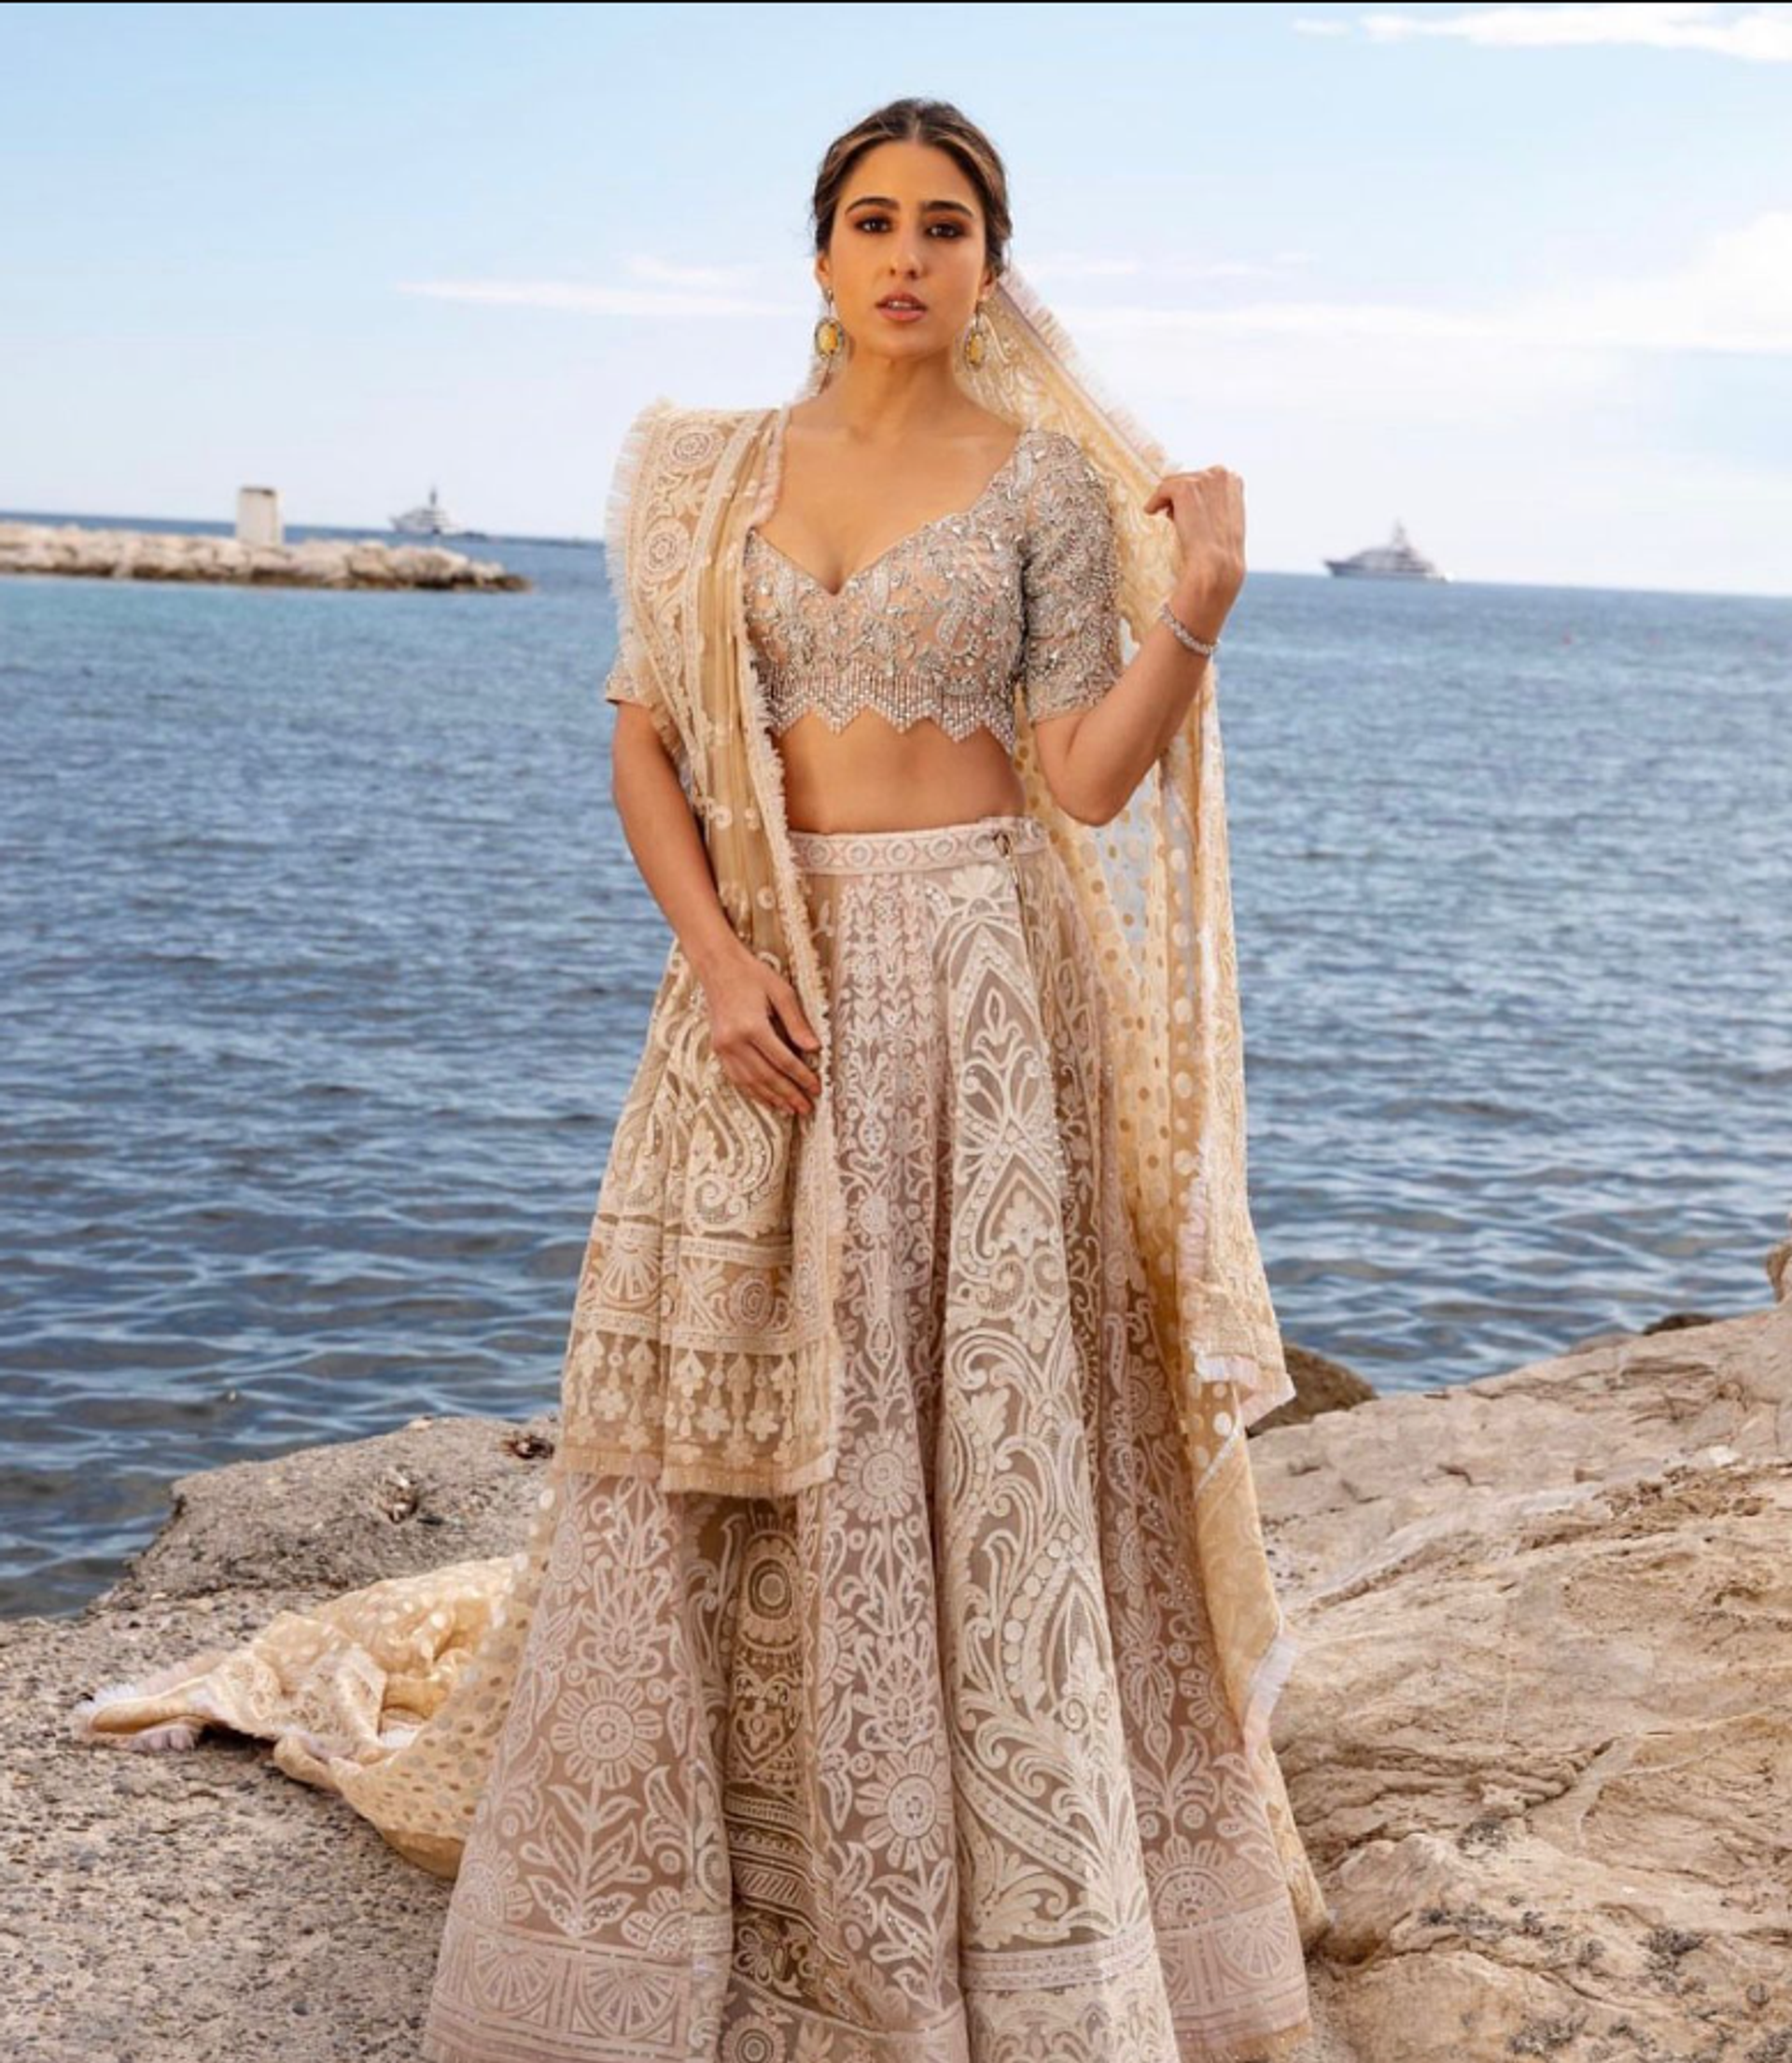 Bollywood star Sara Ali Khan made her red carpet debut at Cannes 2023 wearing beige and cream white lehenga designed by famous couturiers Abu Jani and Sandeep Khosla. - Sputnik India, 1920, 17.05.2023